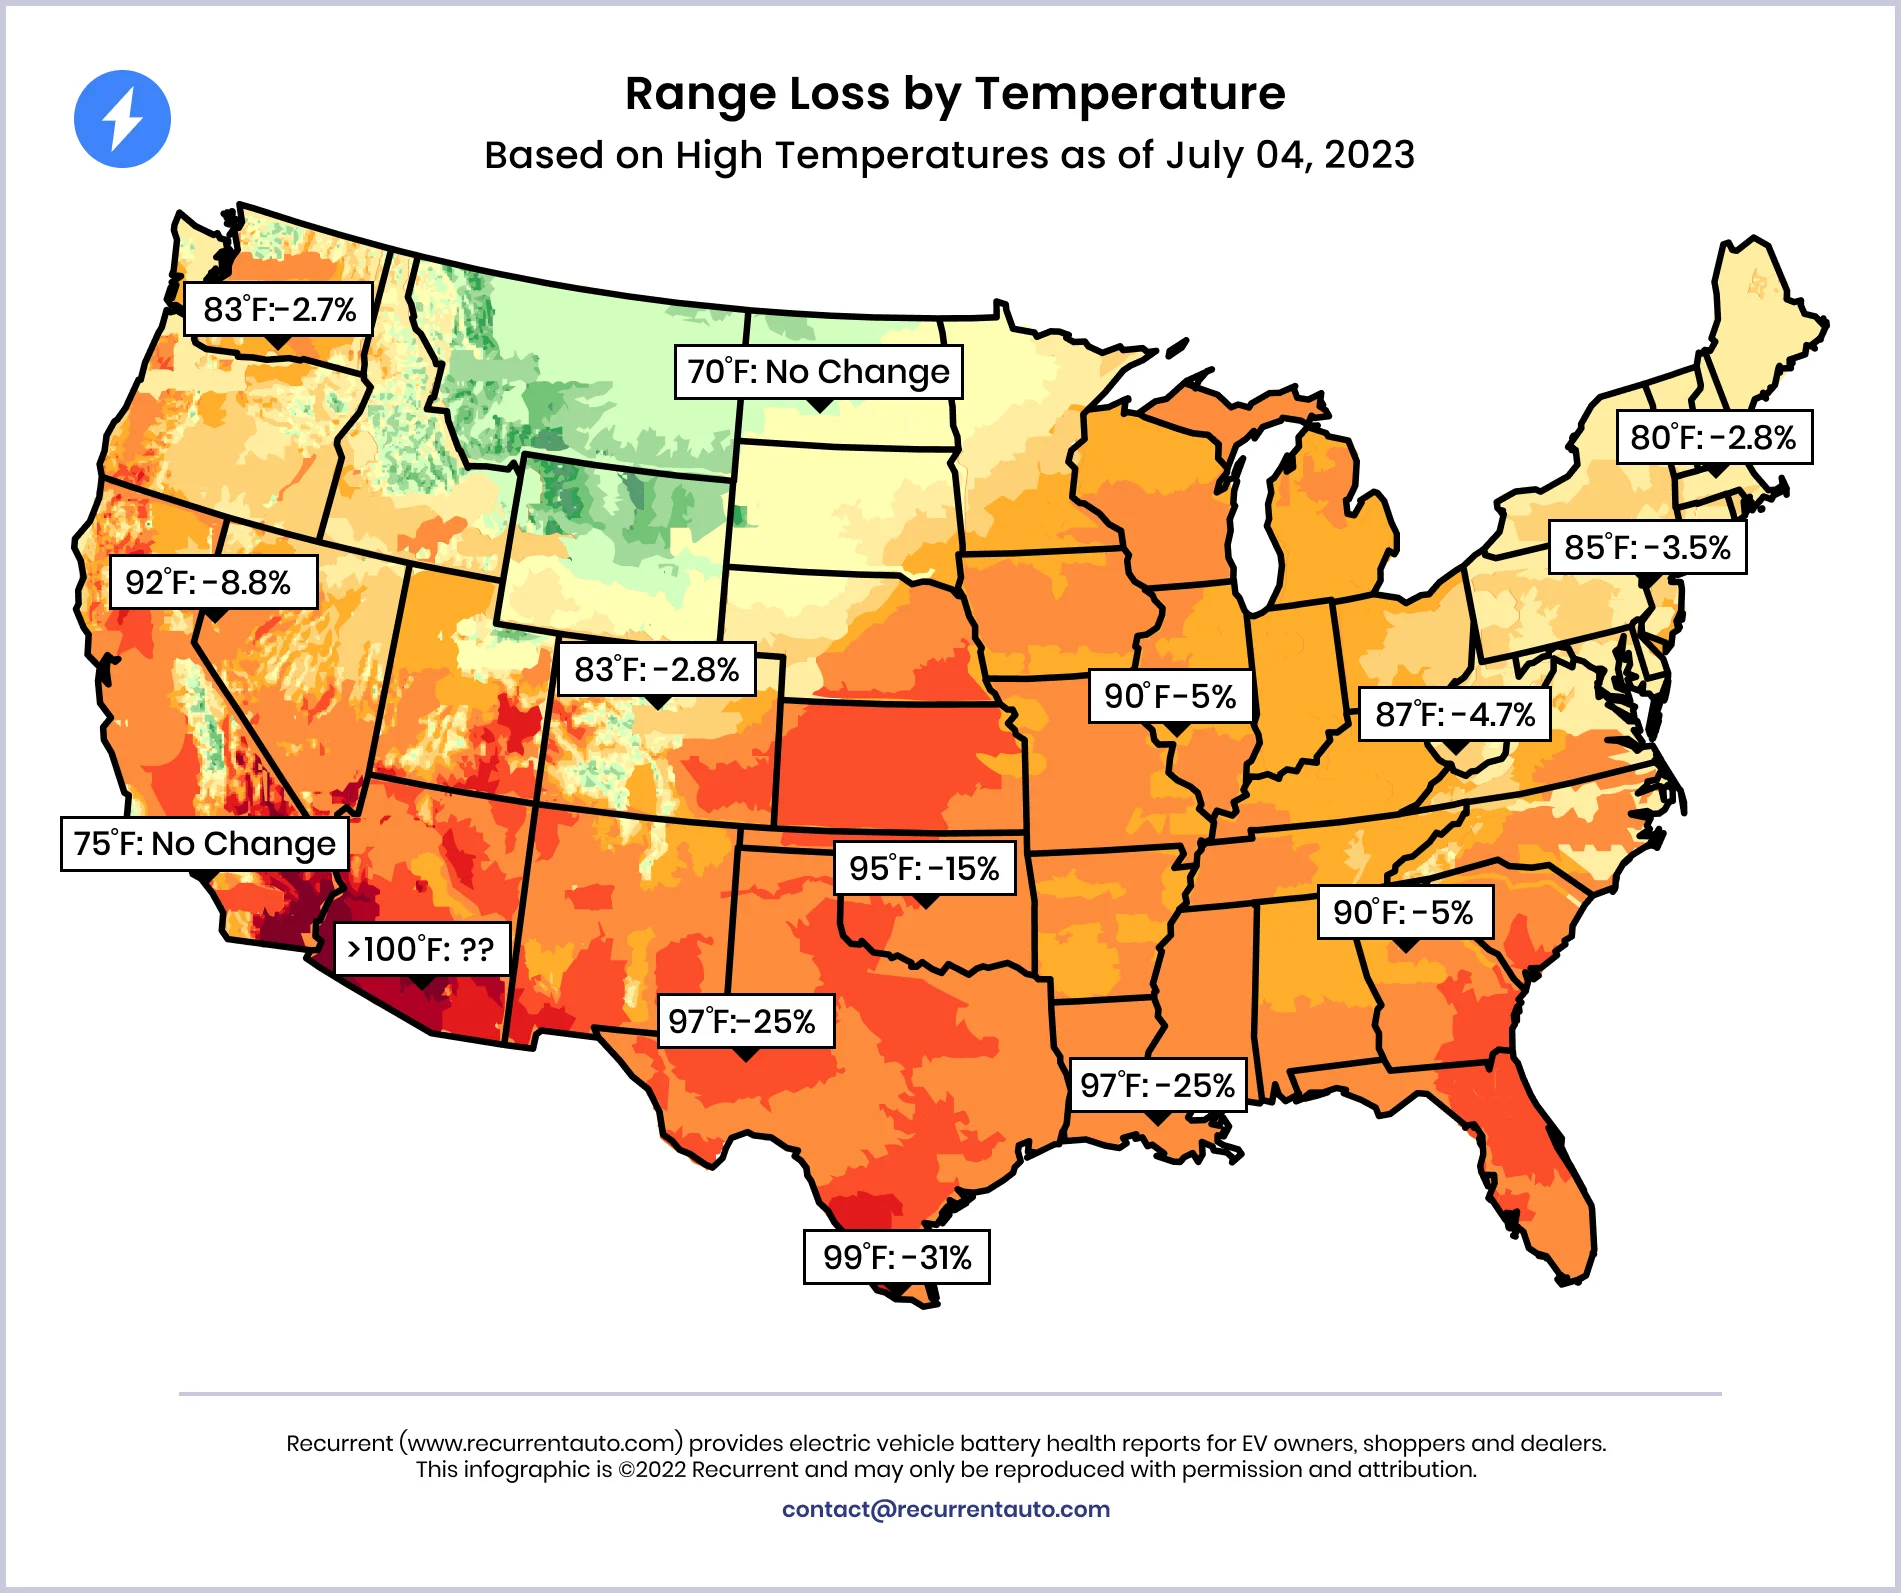 Range loss by temperature overlaid on US map